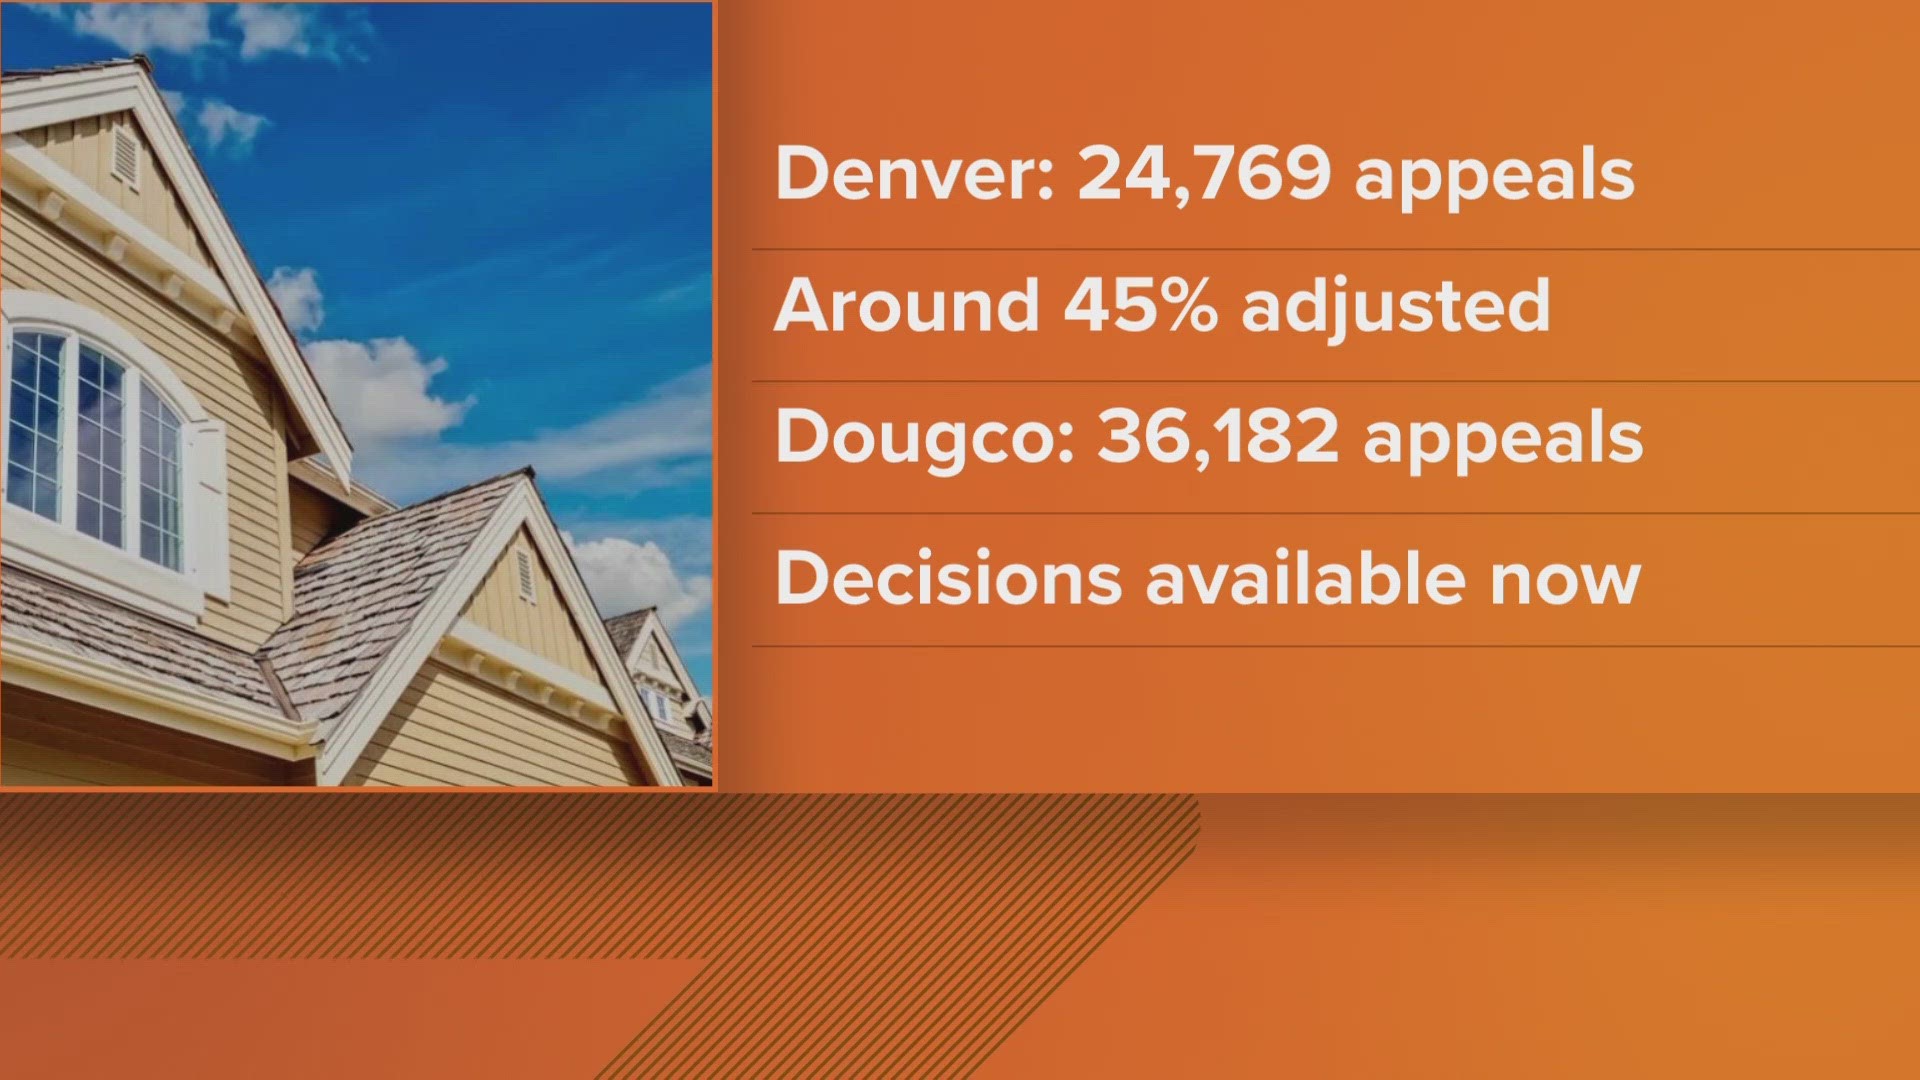 Jefferson County, Douglas County and Denver said appeal decisions were sent out this week after property values skyrocketed.